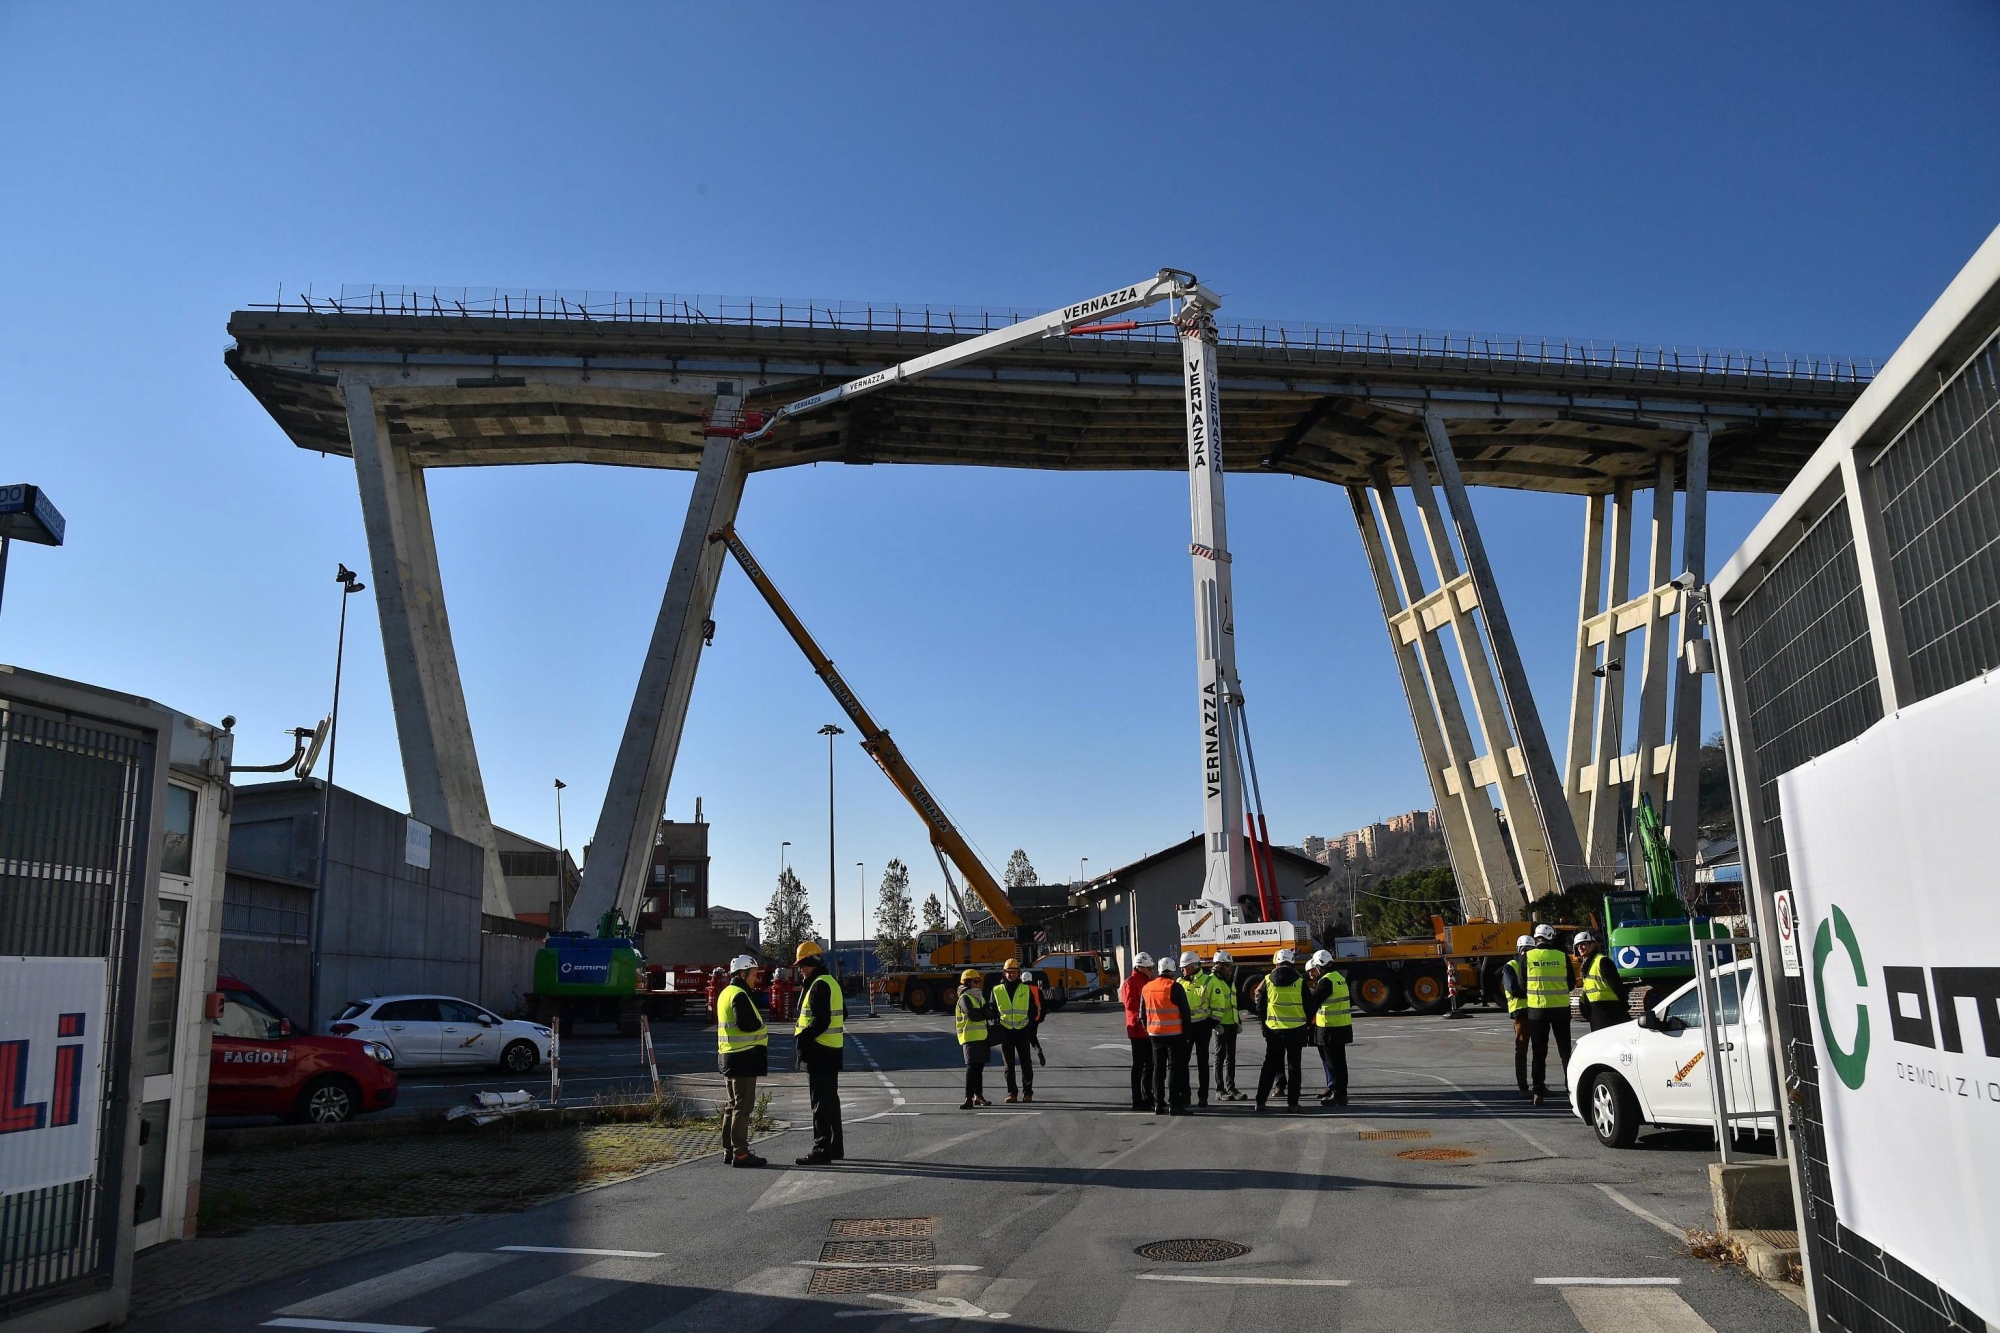 epa07233455 A view of the opening of the construction site for the demolition of the partially collapsed Morandi highway bridge in Genoa, northern Italy, 15 December 2018. The Morandi bridge partially collapsed on 14 August, killing 43 people. According to reports quoting the Italian city's mayor Marco Bucci, Genoa will have a new bridge within a year.  EPA/LUCA ZENNARO ITALY GENOA BRIDGE